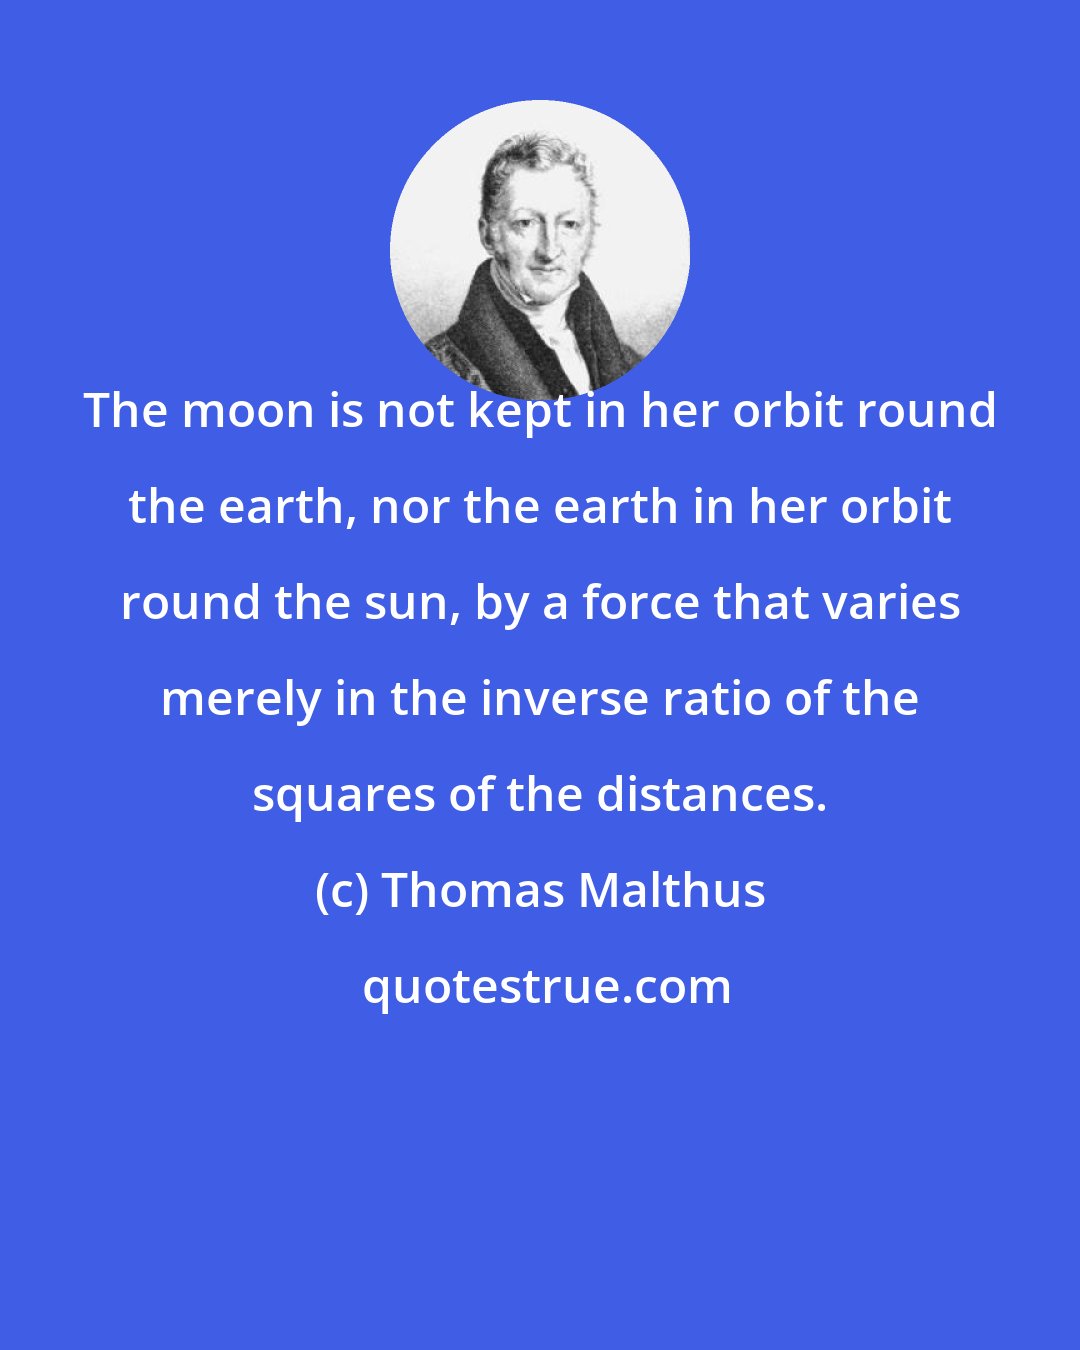 Thomas Malthus: The moon is not kept in her orbit round the earth, nor the earth in her orbit round the sun, by a force that varies merely in the inverse ratio of the squares of the distances.